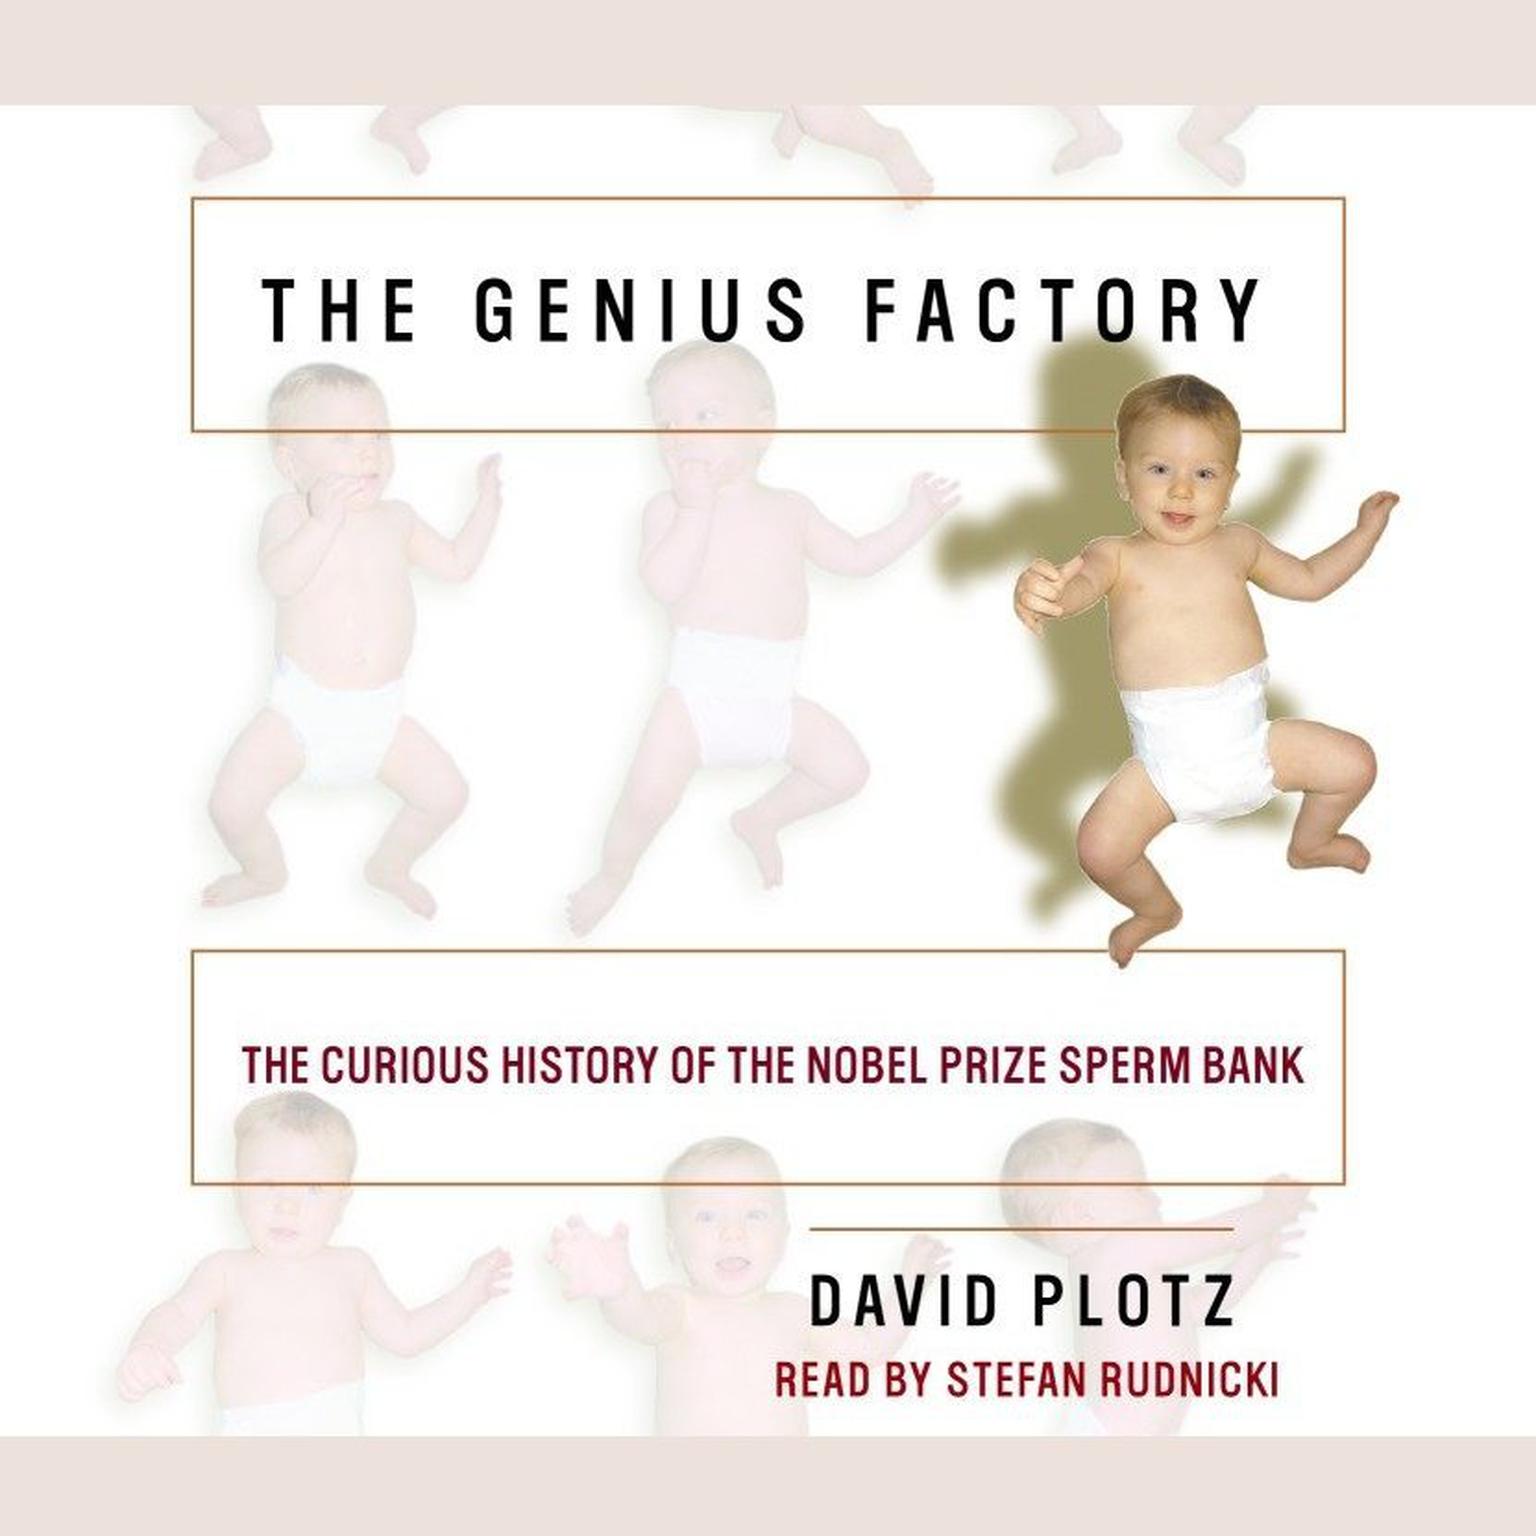 The Genius Factory (Abridged): The Curious History of the Nobel Prize Sperm Bank Audiobook, by David Plotz